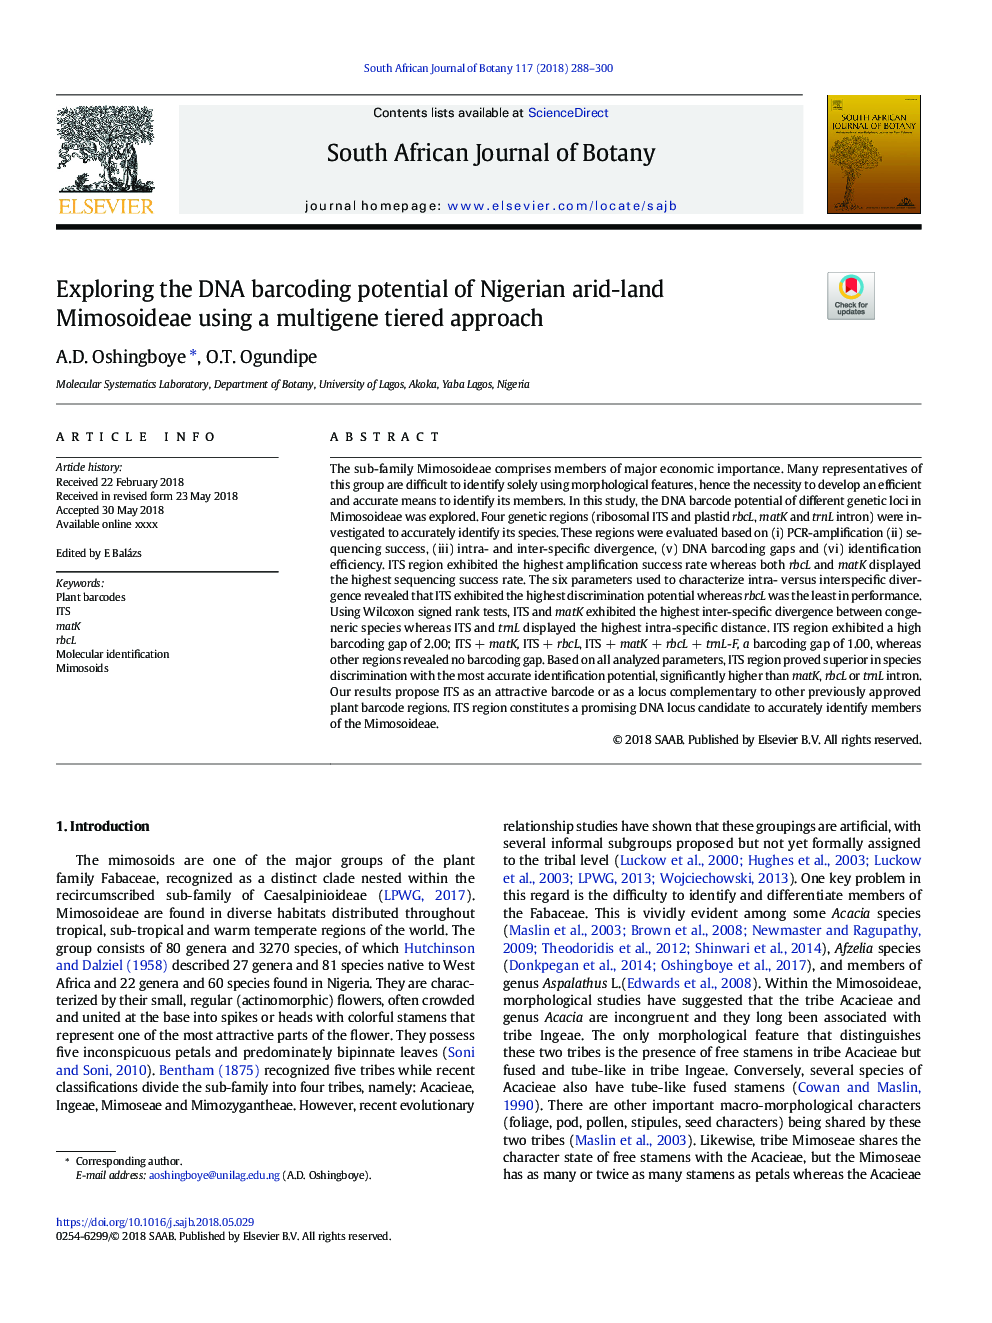 Exploring the DNA barcoding potential of Nigerian arid-land Mimosoideae using a multigene tiered approach